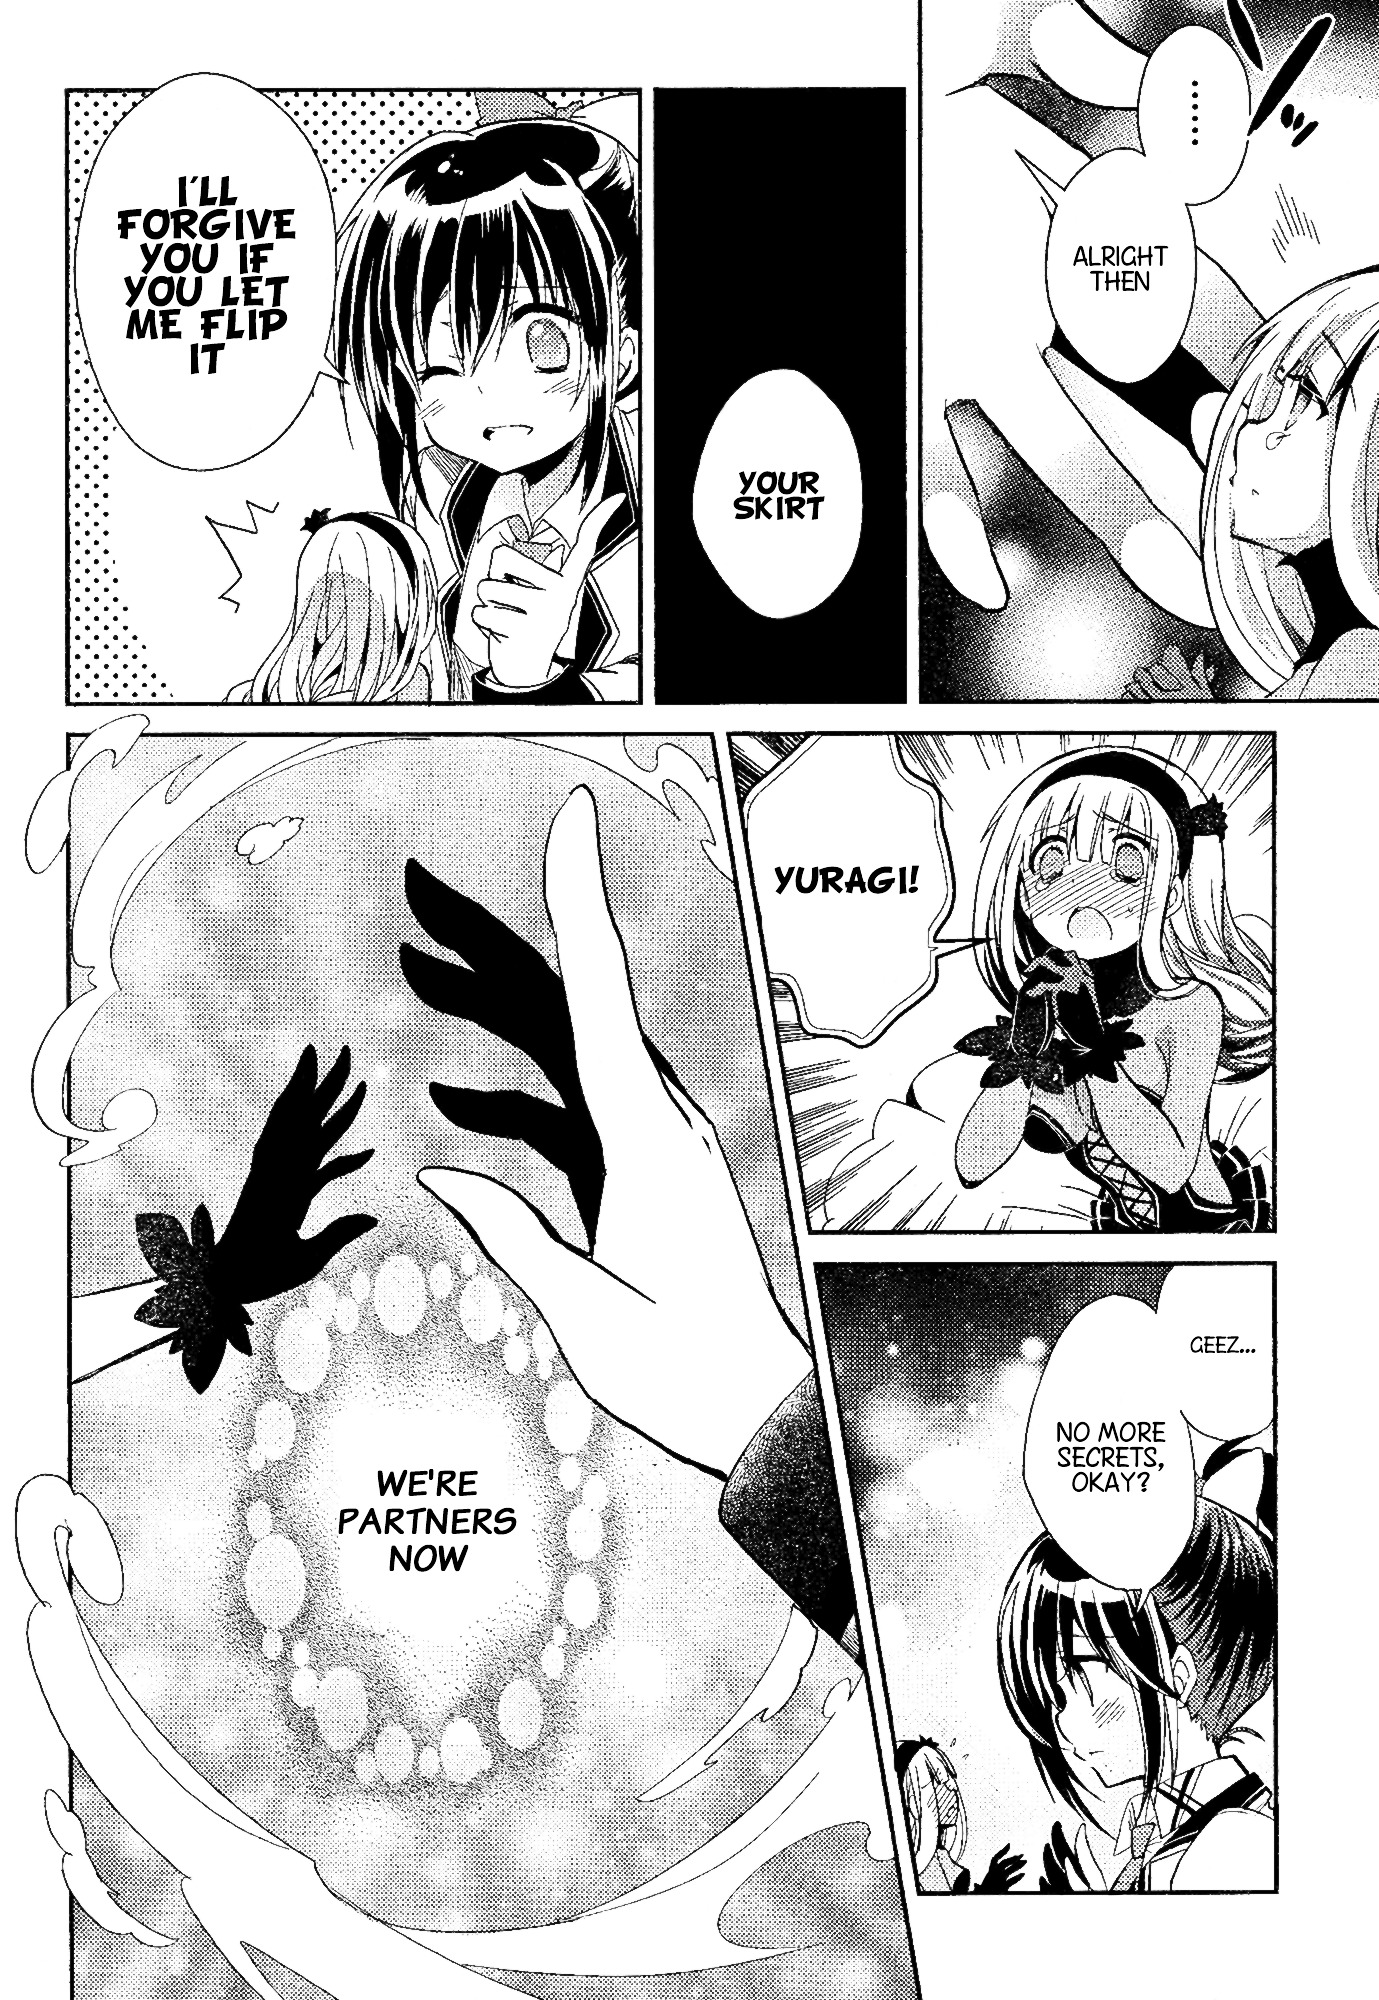 Selector Infected Wixoss - Re/verse - Chapter 3 #17